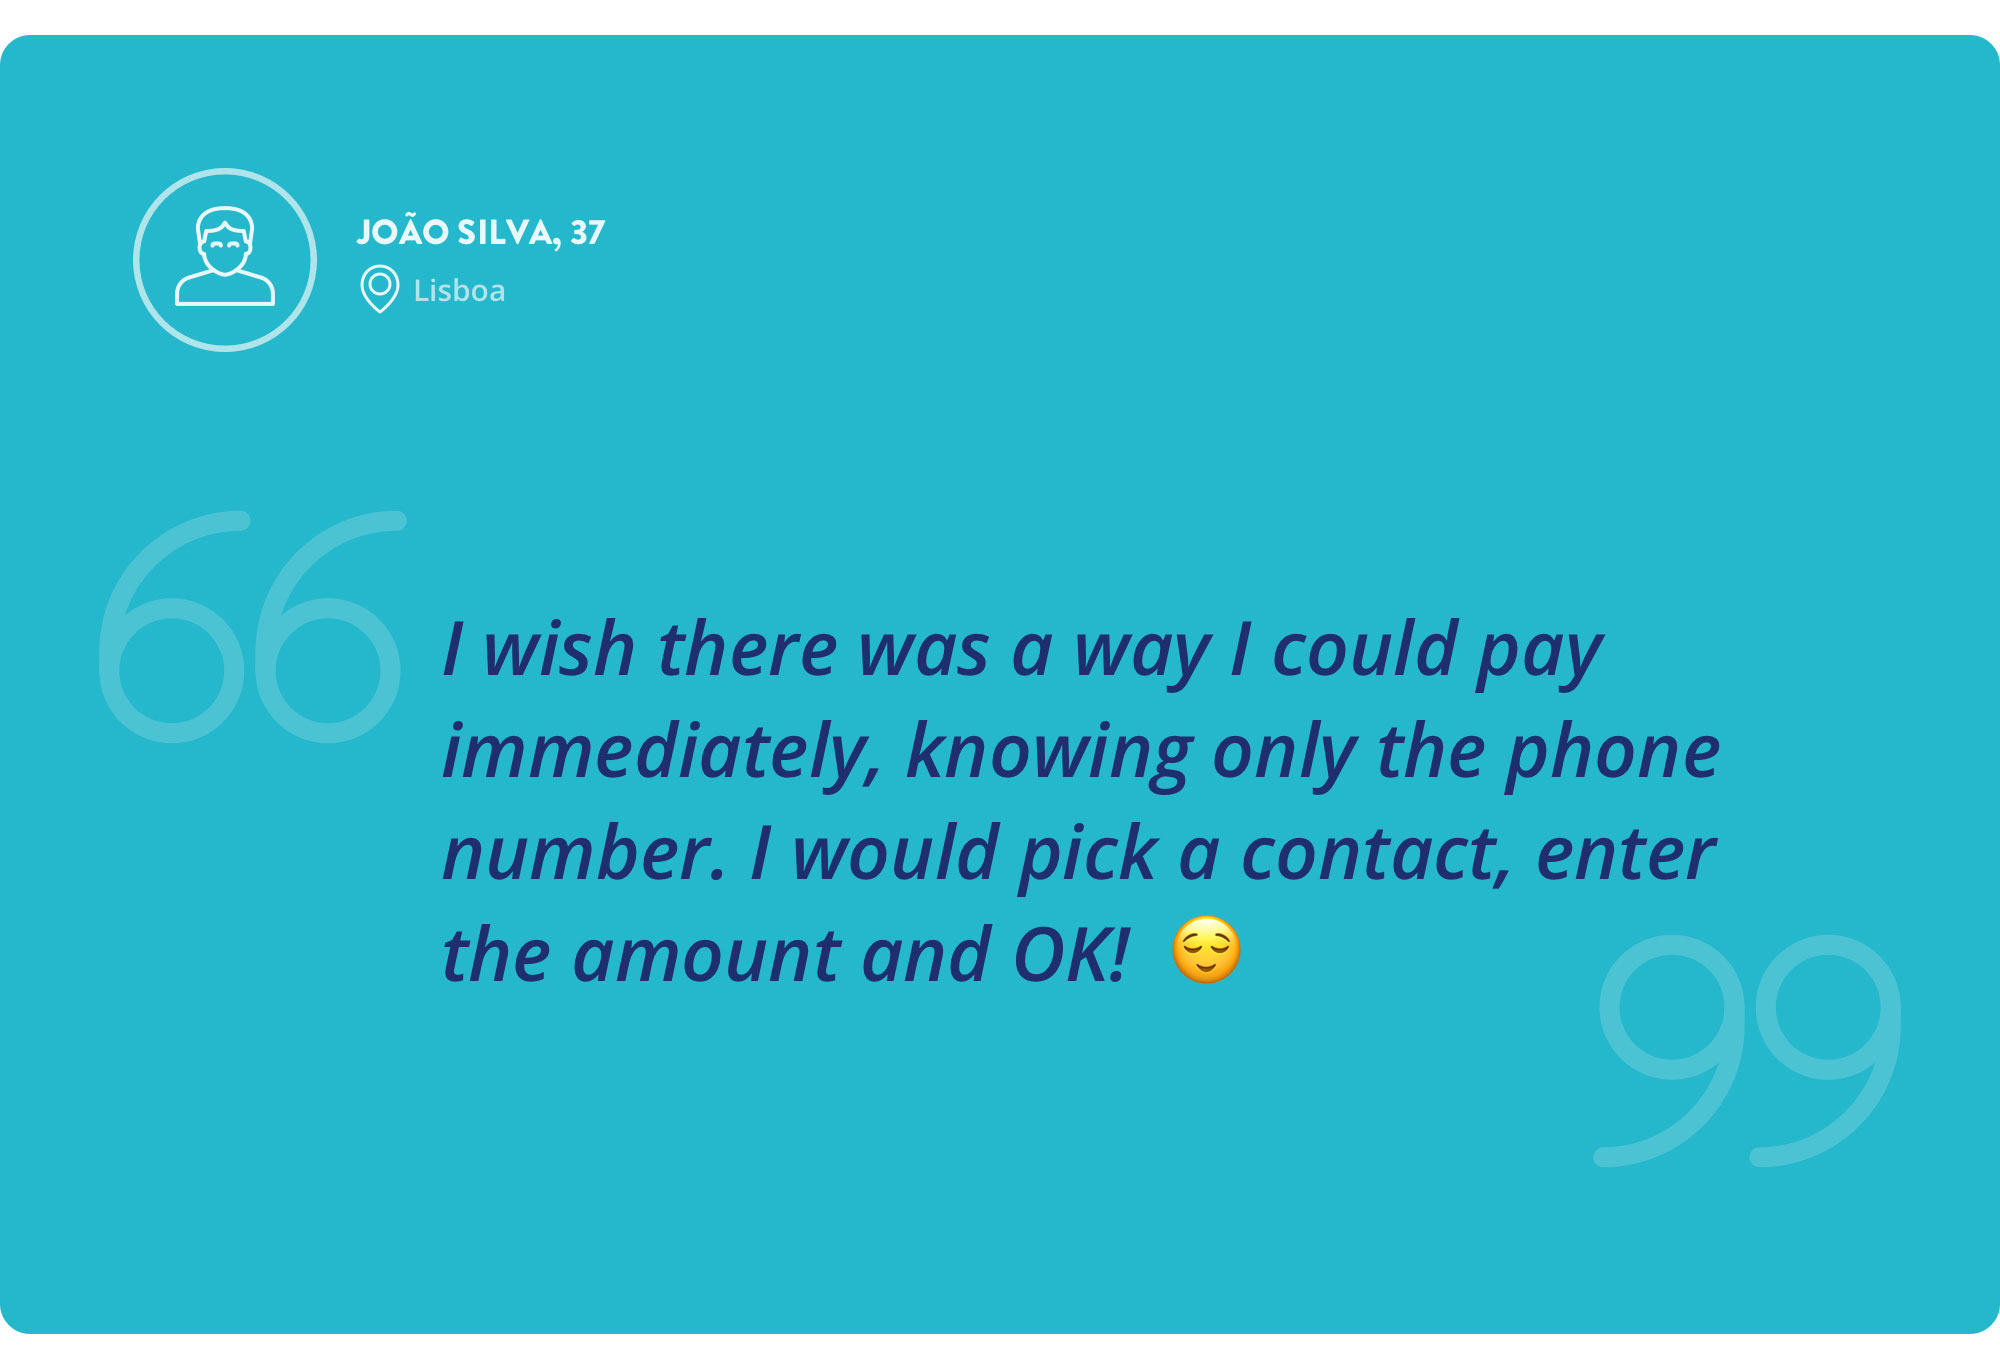 Interview quote by João Silva, 37 years old — I wish there was a way I could pay immediately, knowing only the phone number. I would pick a contact, enter the amount and OK!